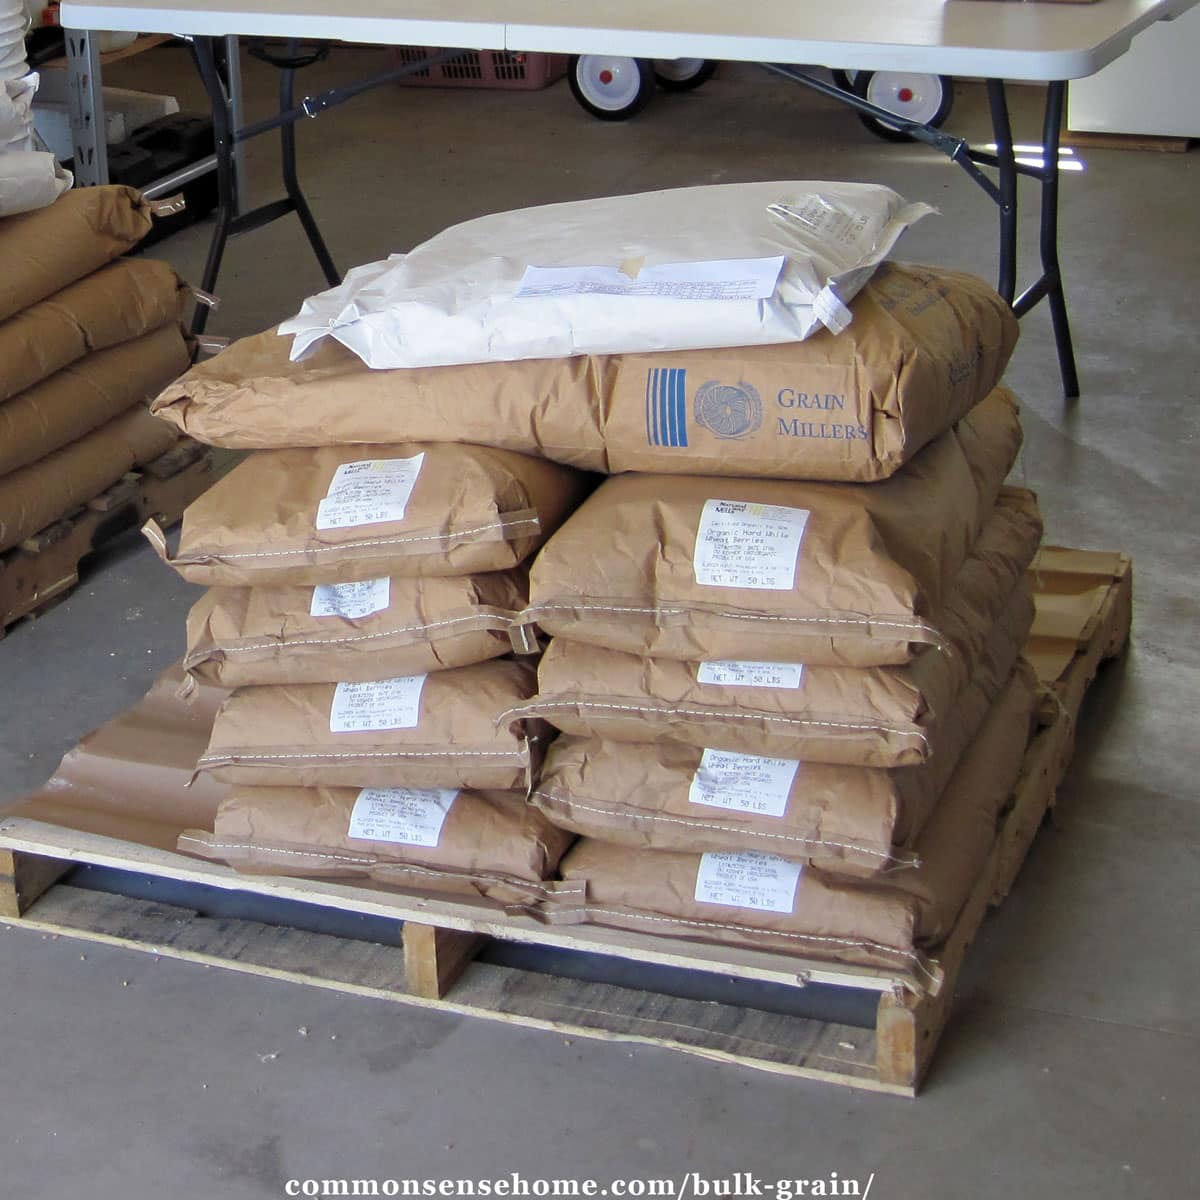 large bags of grain on a pallet